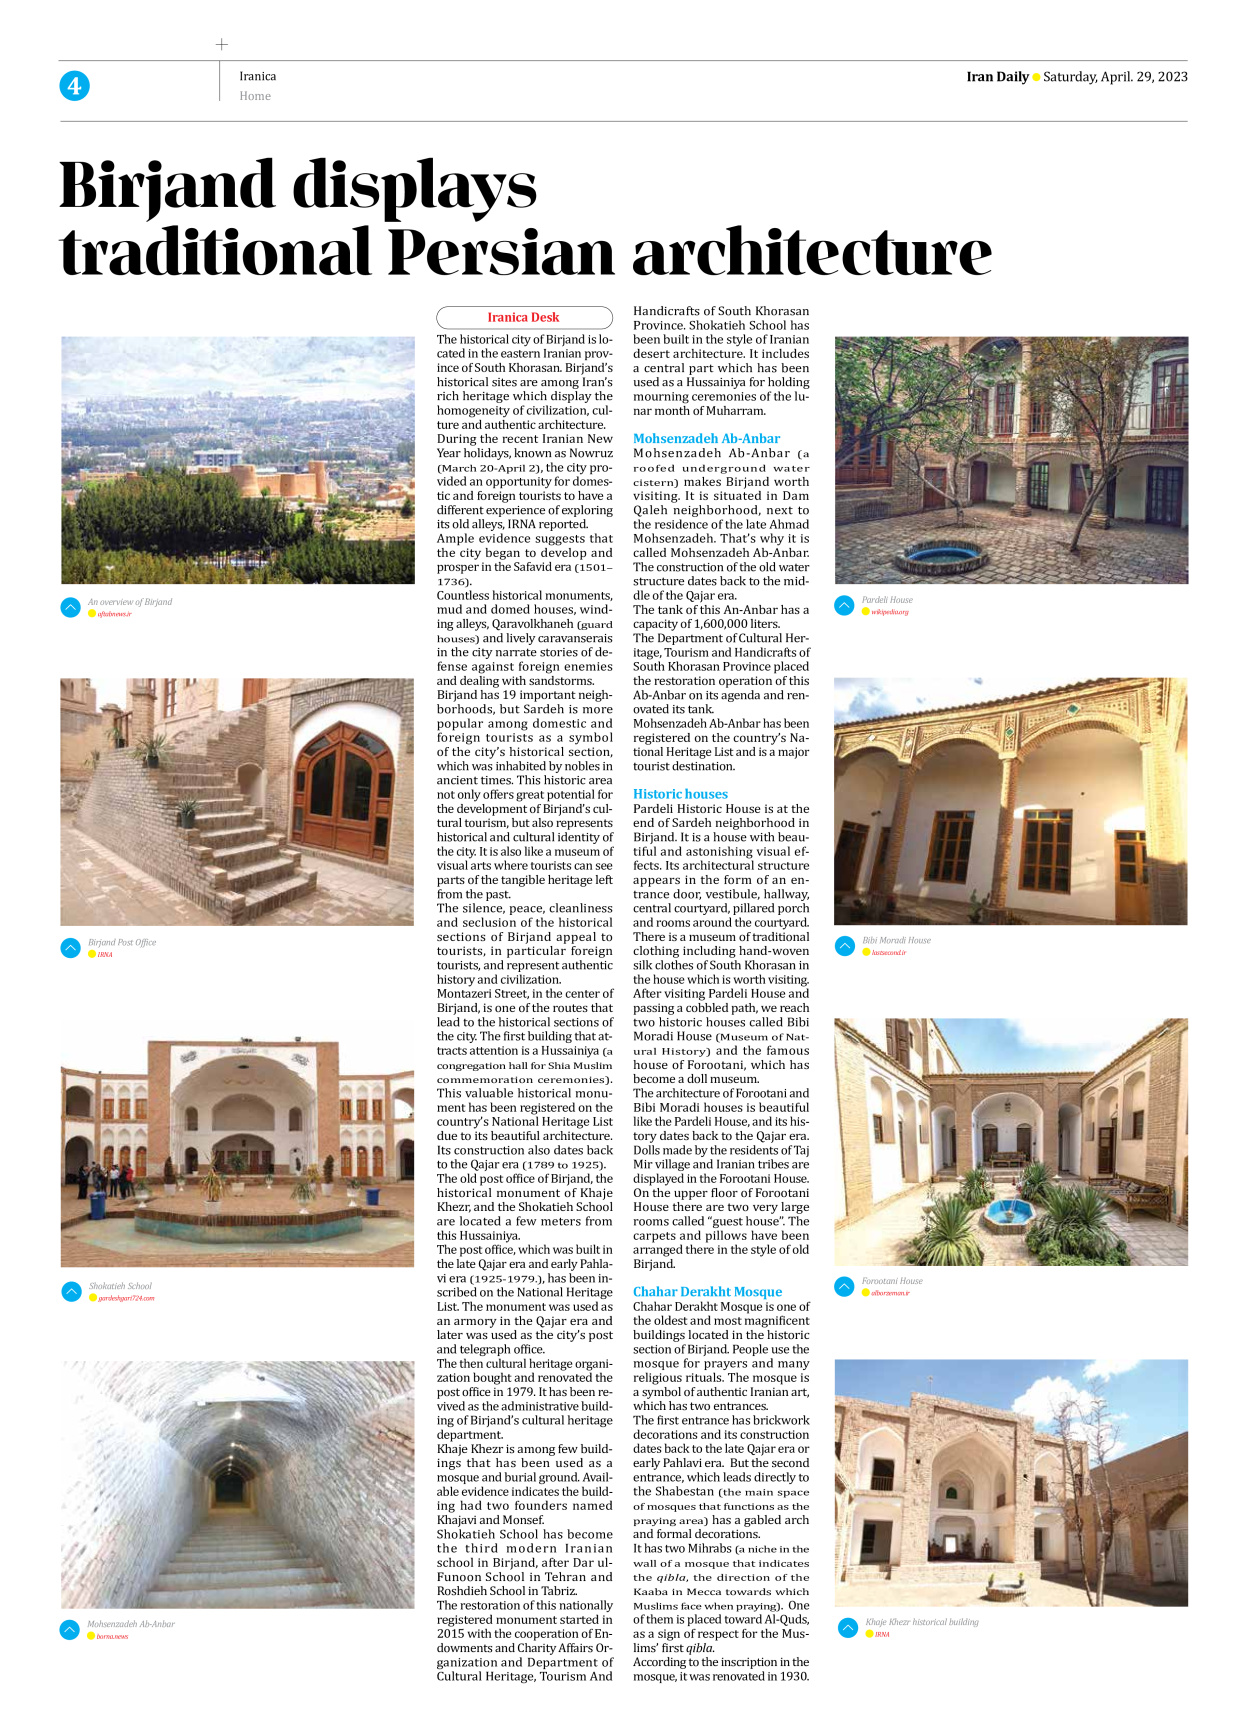 Iran Daily - Number Seven Thousand Two Hundred and Seventy Eight - 29 April 2023 - Page 4